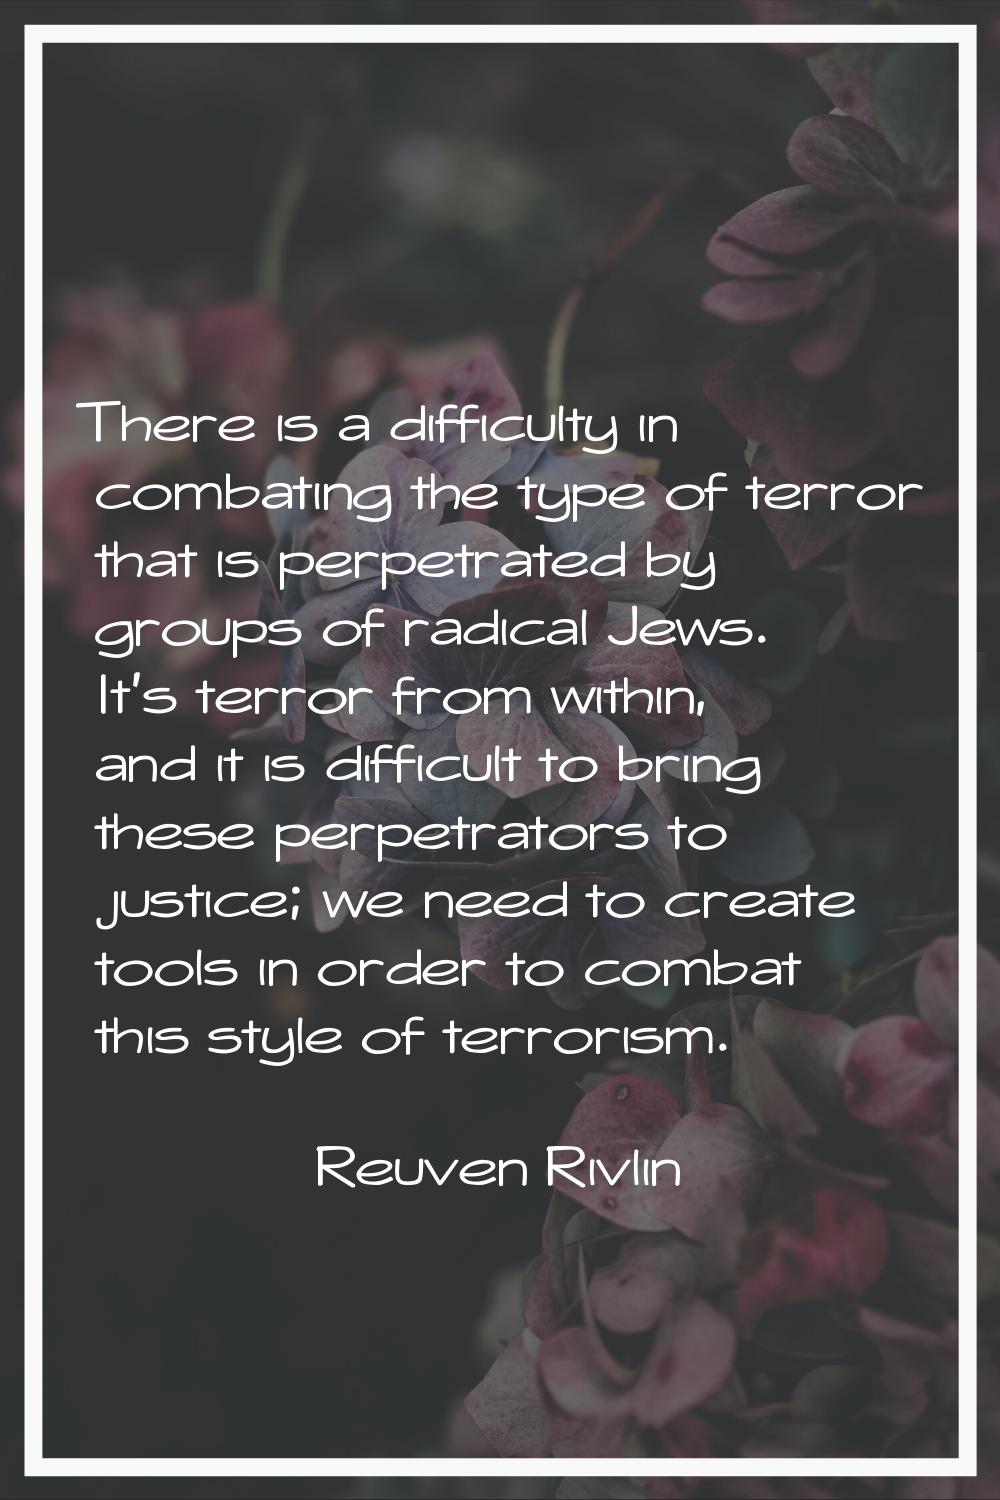 There is a difficulty in combating the type of terror that is perpetrated by groups of radical Jews